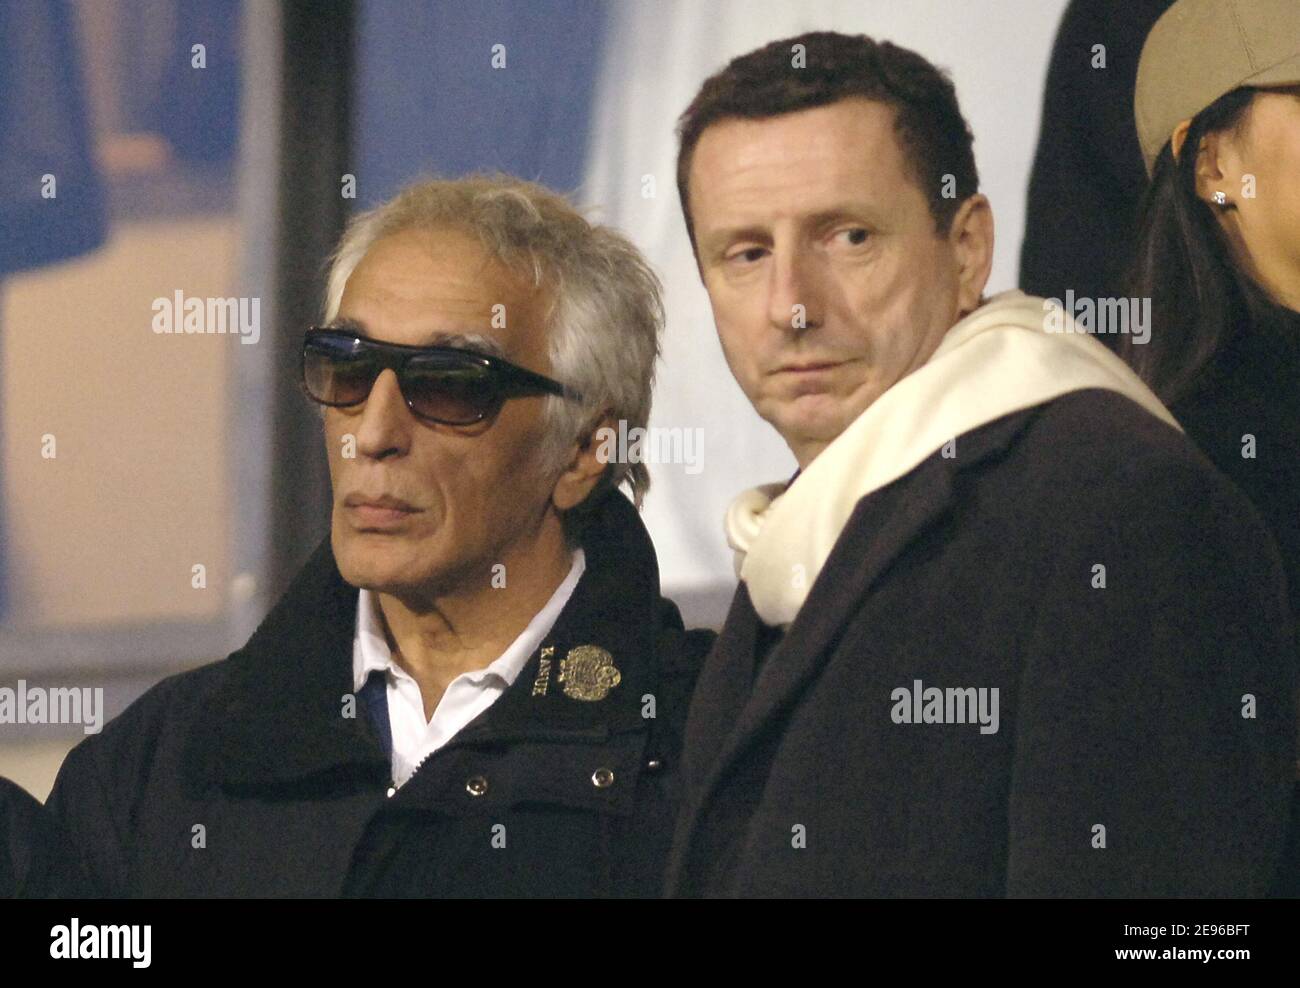 Actor Gerard Darmon and Pierre Botton during the quarter finale first heat at the UEFA Champions league match, Olympic Lyonnais vs AC Milan, in Lyon, France, on March 29, 2006. The game ended in a drew 0-0. Photo by Nicolas Gouhier/Cameleon/ABACAPRESS.COM Stock Photo